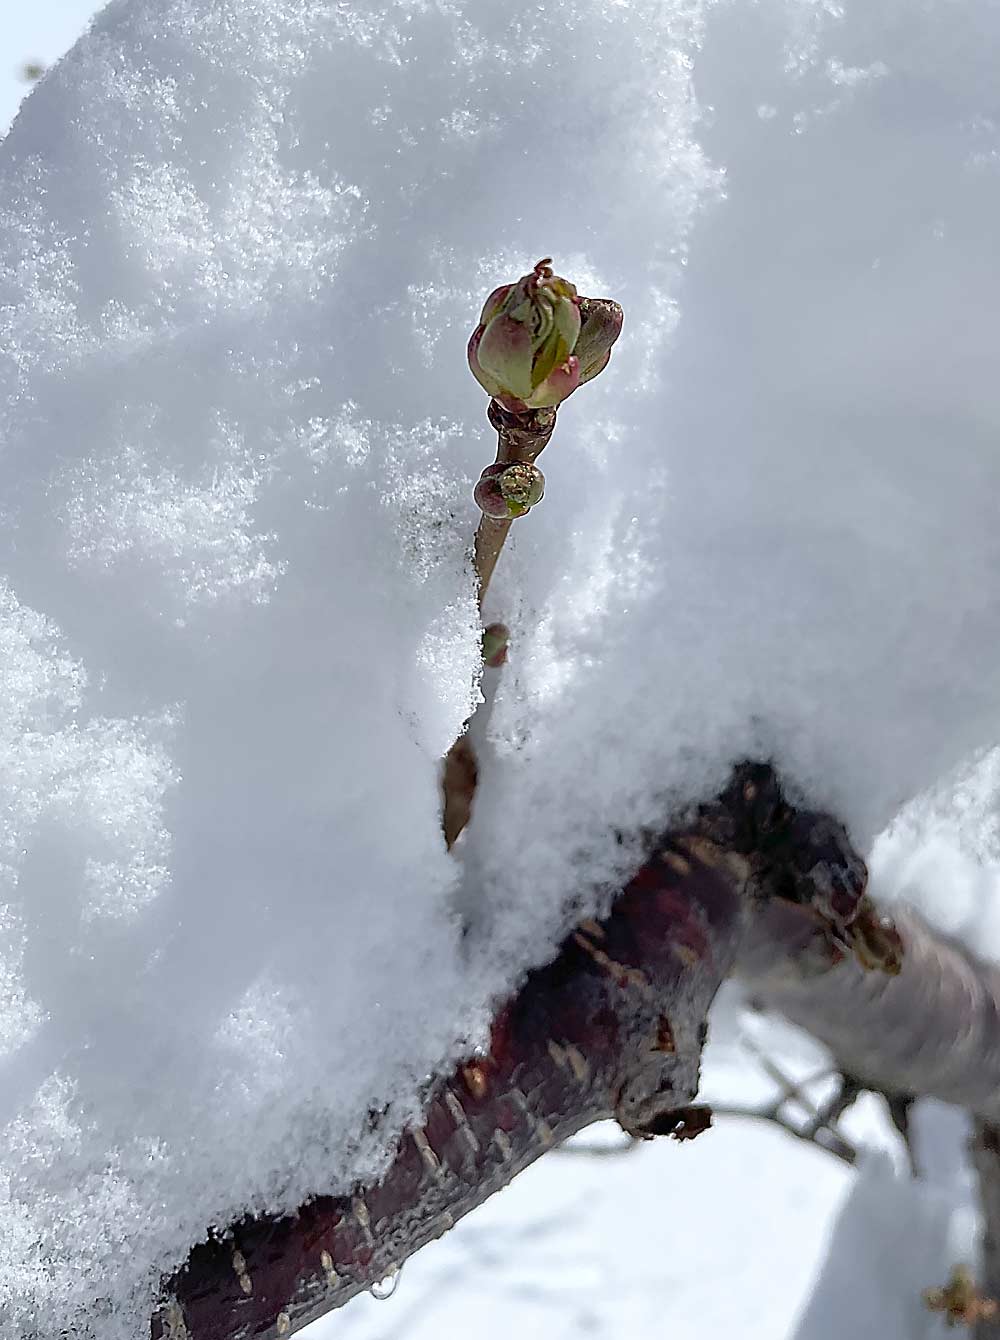 Lots of things can go wrong in a cherry’s growing season. In early spring, warm temperatures encourage bud development, which makes the buds more vulnerable to subsequent cold. (Courtesy Jennifer Wiggs)